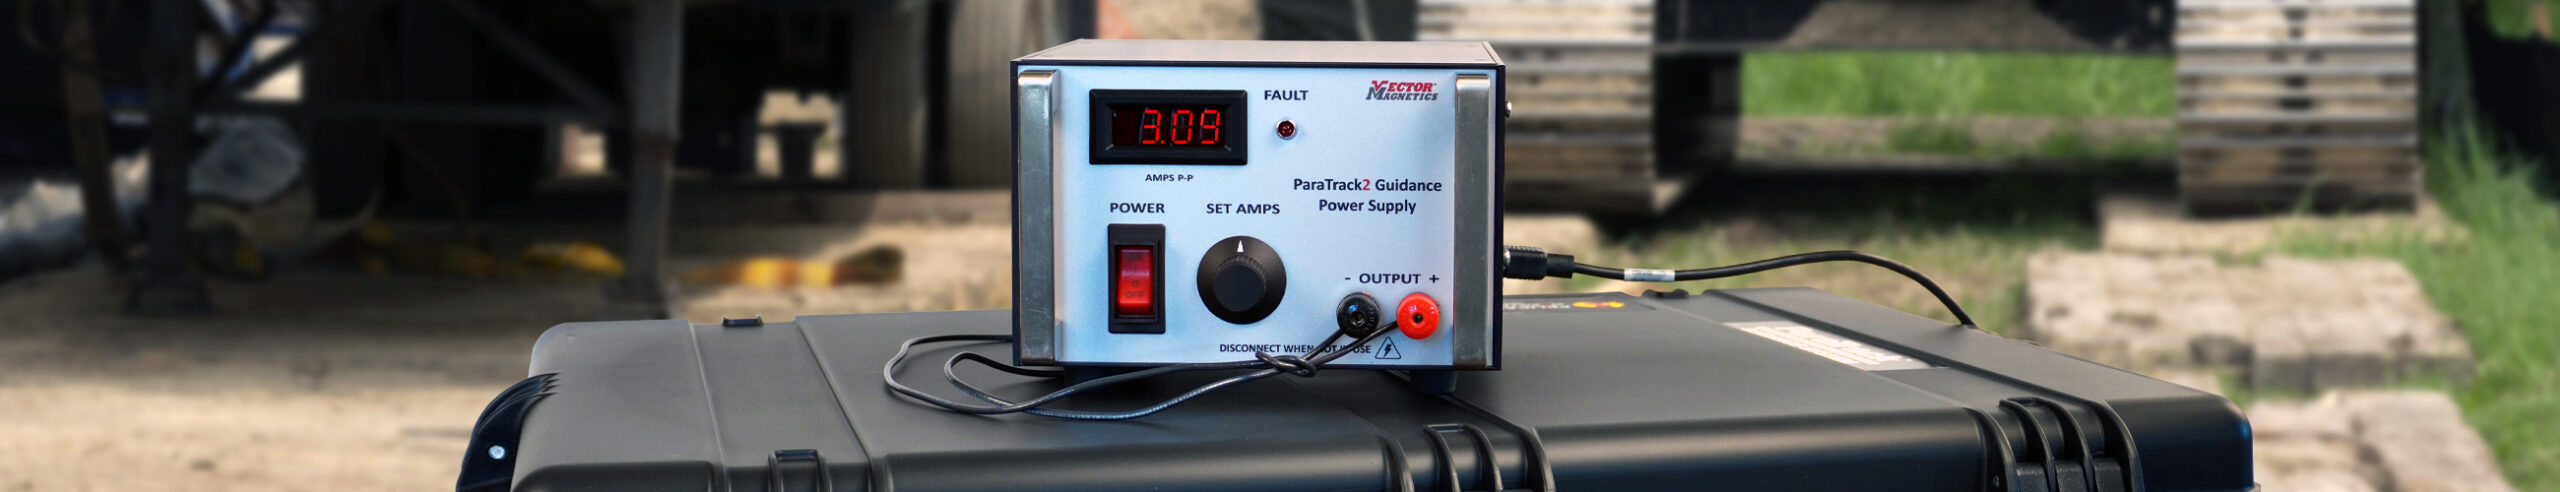 ParaTrack2 Guidance Power Supply